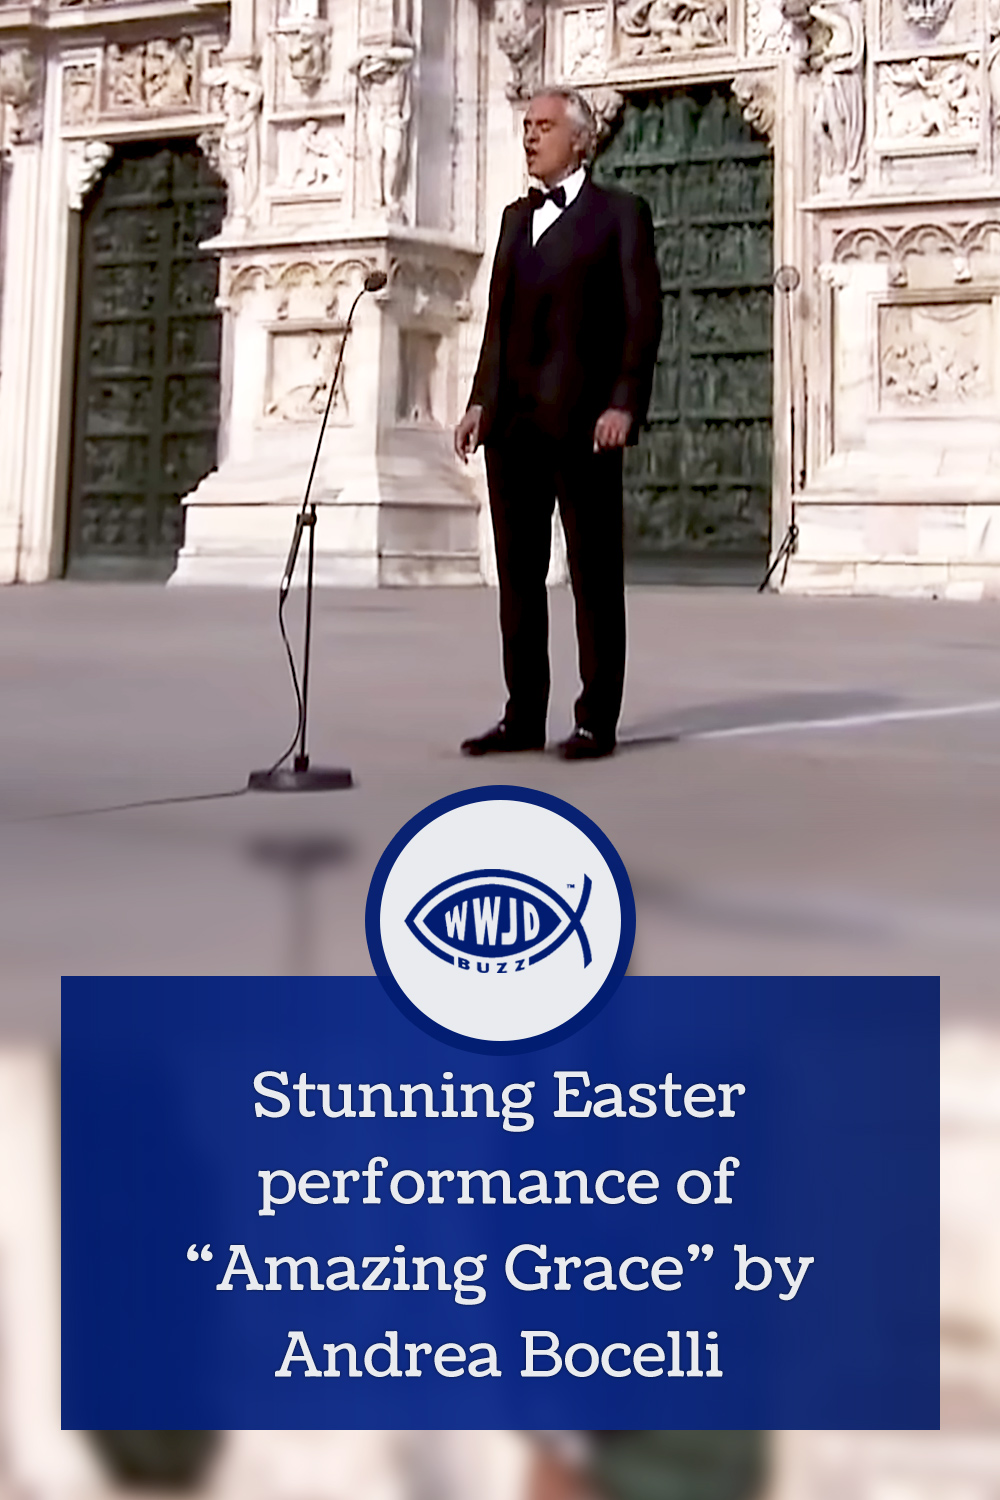 Stunning Easter performance of “Amazing Grace” by Andrea Bocelli